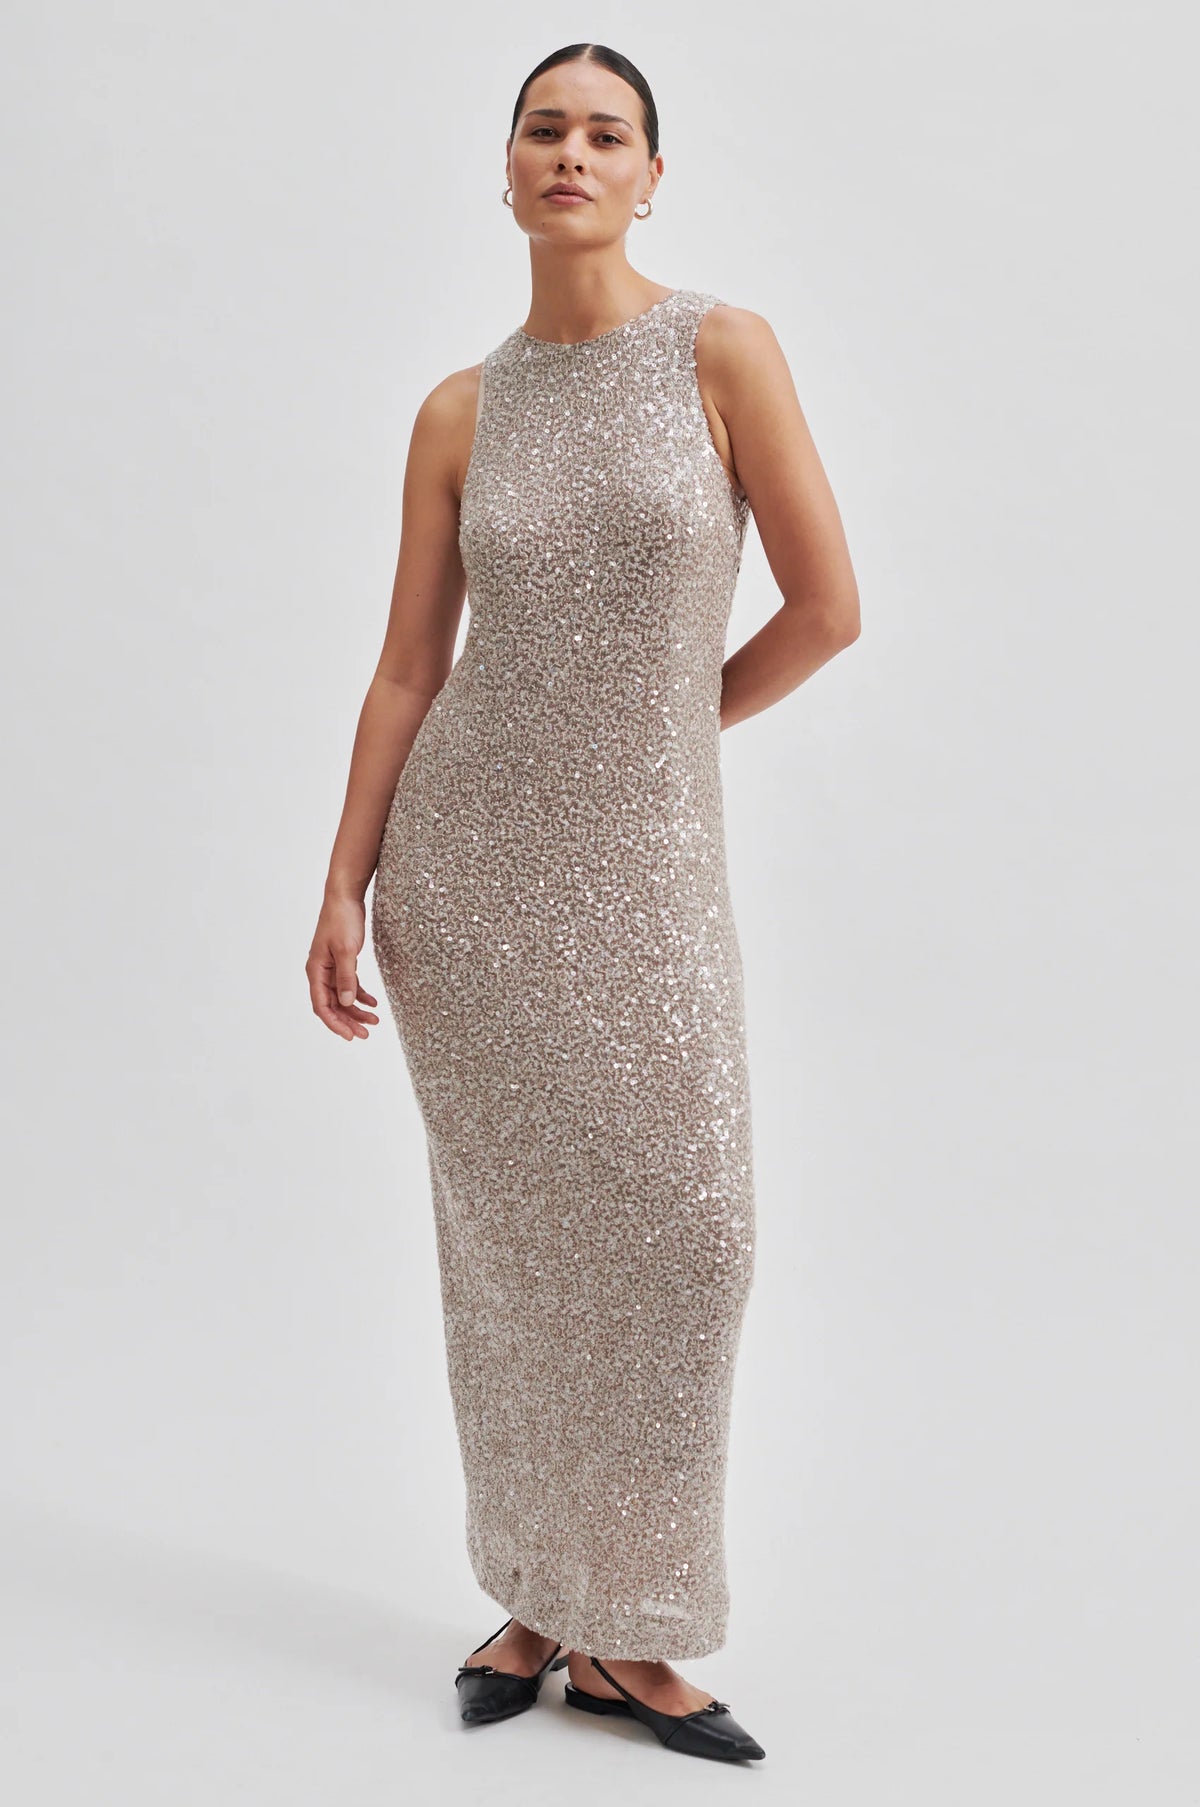 Body con stretchy maxi dress with crew neck and back centre split with overlay sequins all over in taupe